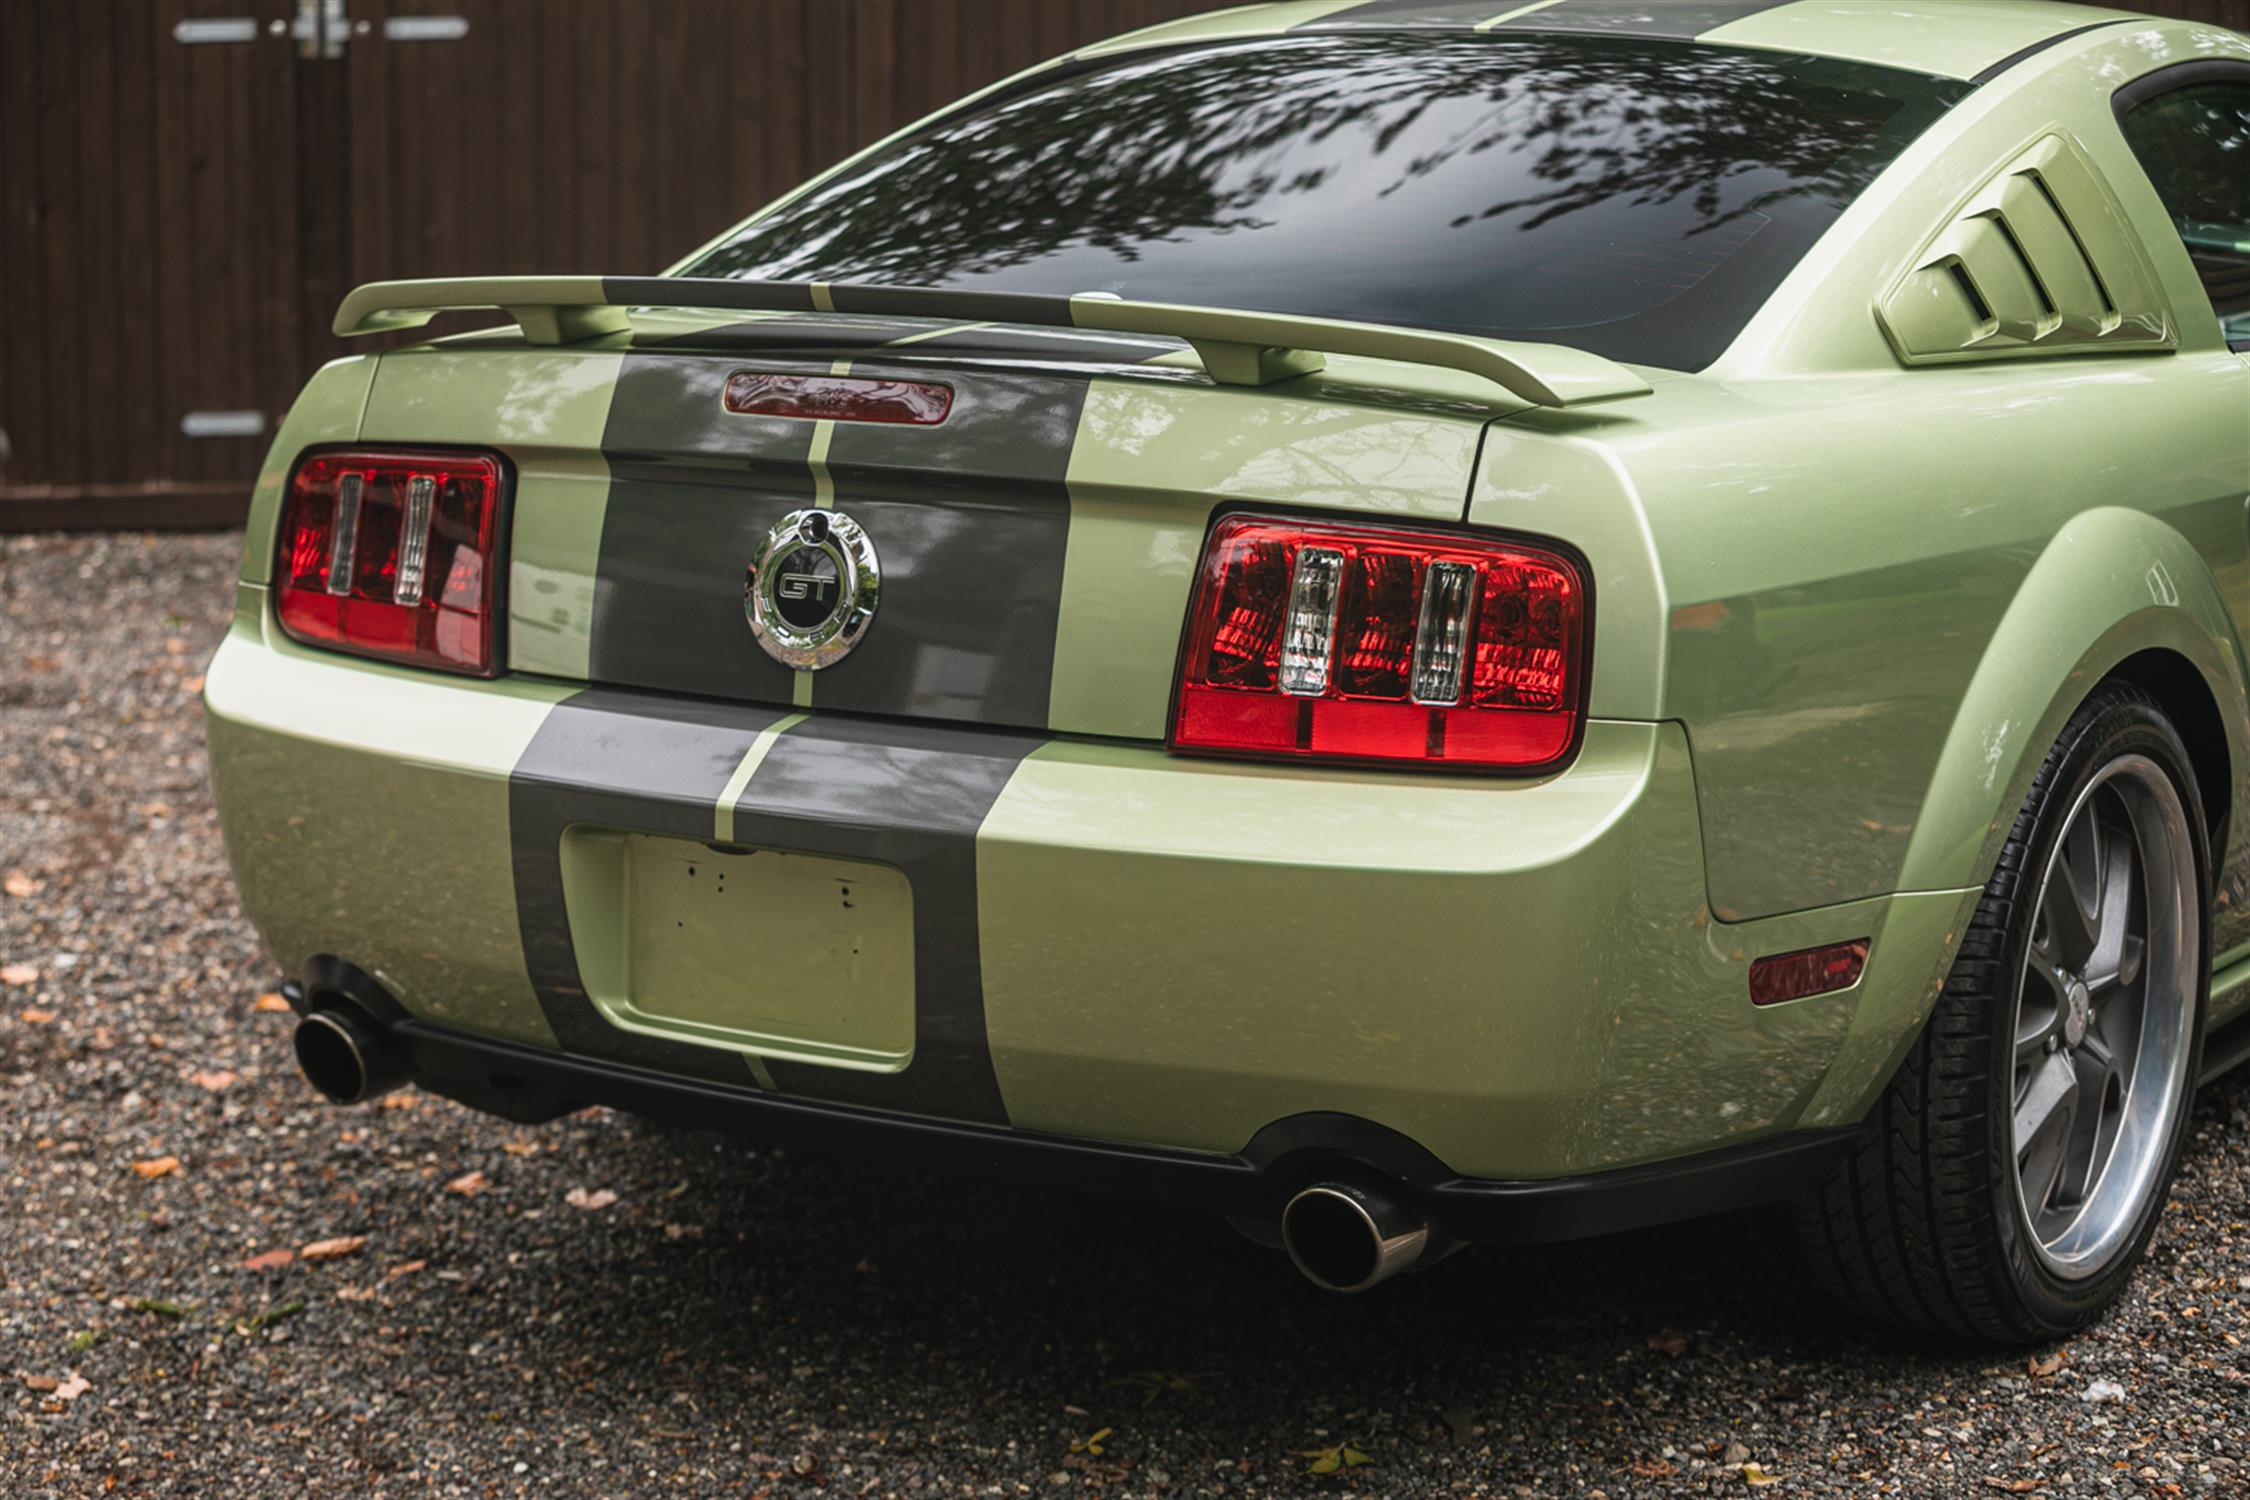 2005 Ford Mustang GT Premium Supercharged 4.6-Litre V8 Manual Saleen-homage - Image 10 of 10